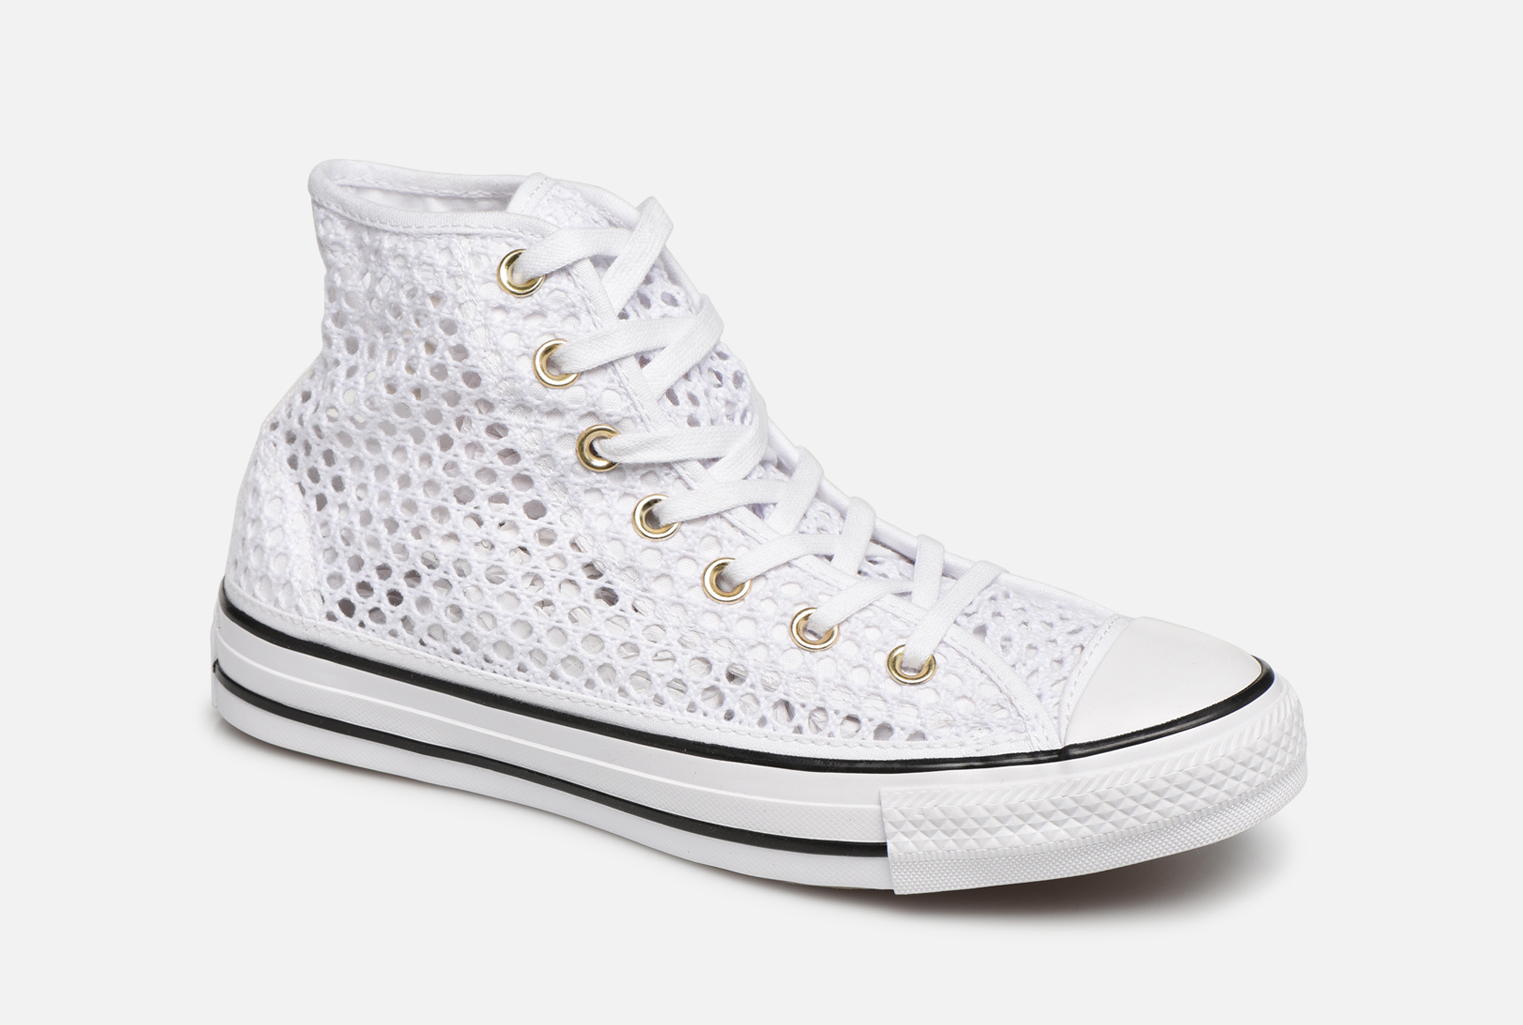 converse basse blanche femme taille 41